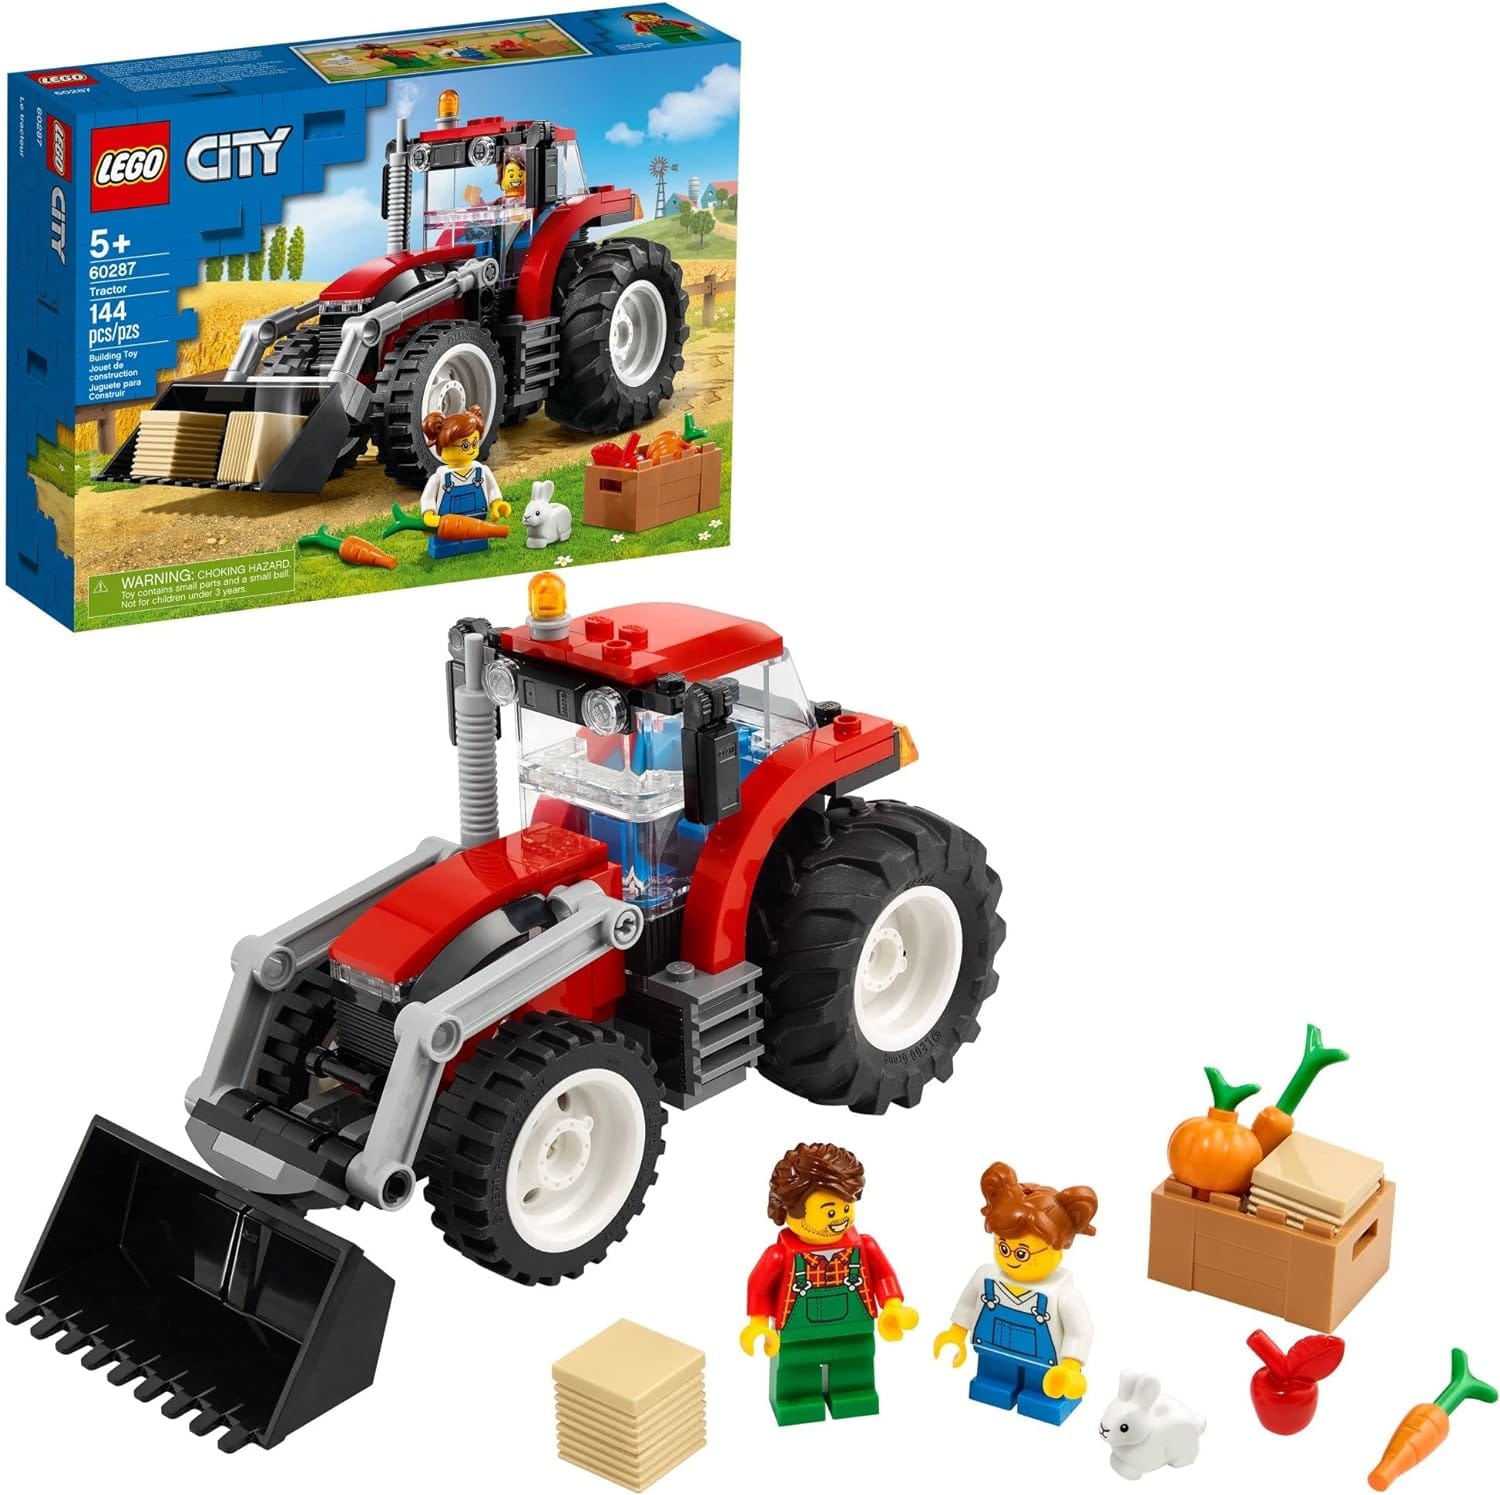 LEGO City Great Vehicles Tractor 60287 Building Toy Set Review